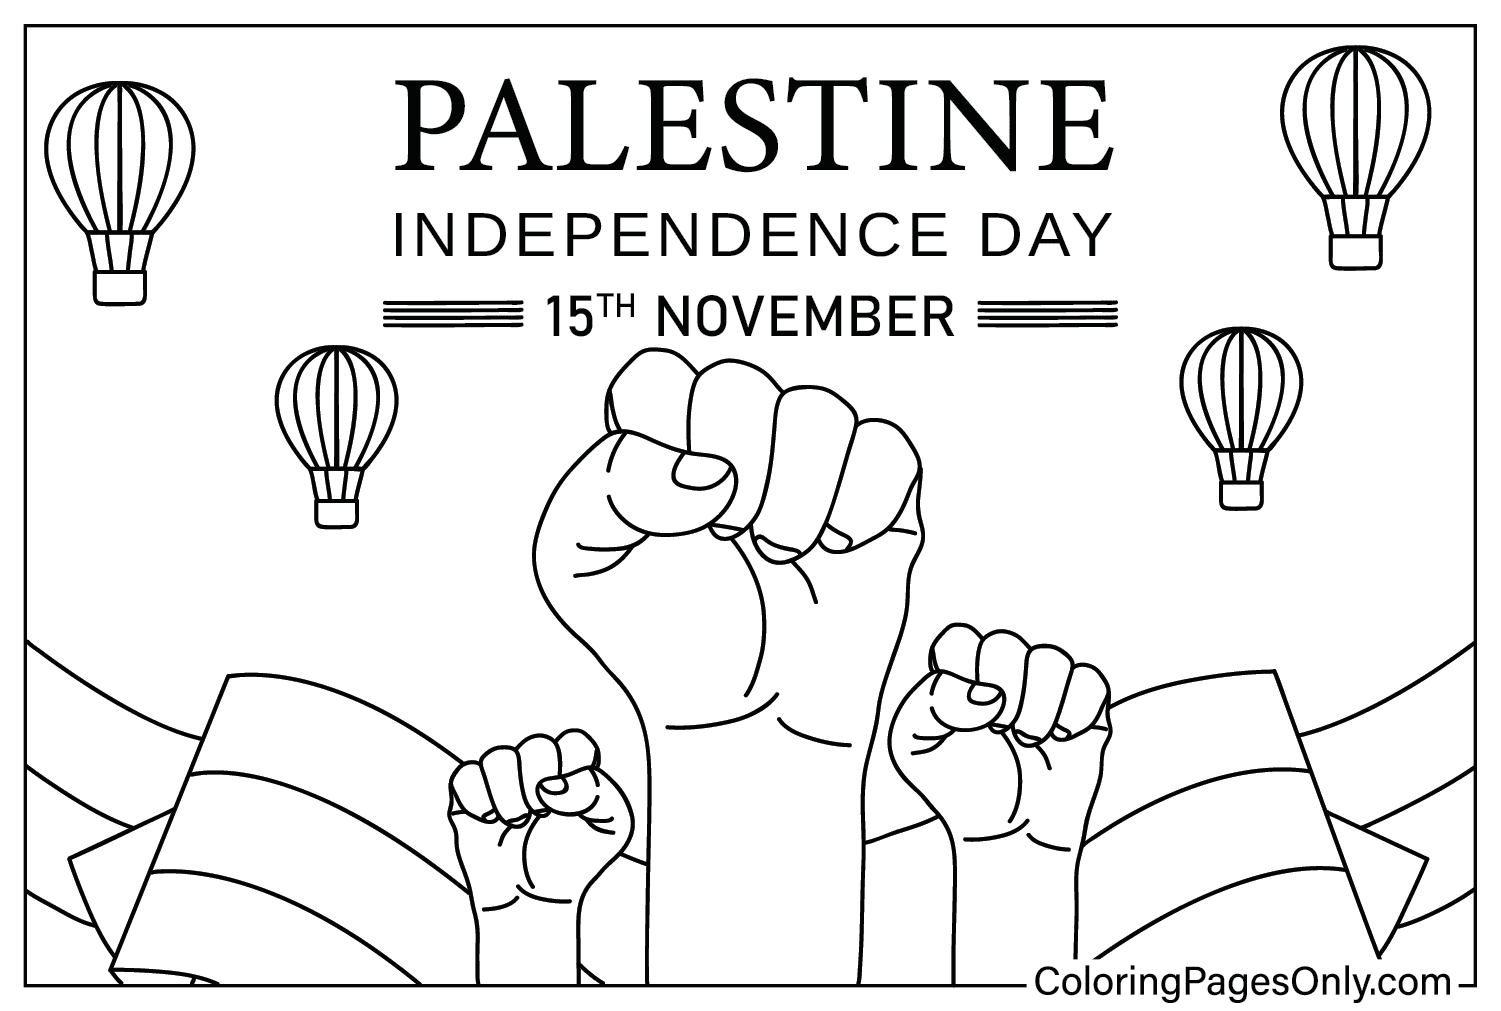 Palestine Independence Day Coloring Page from Palestine